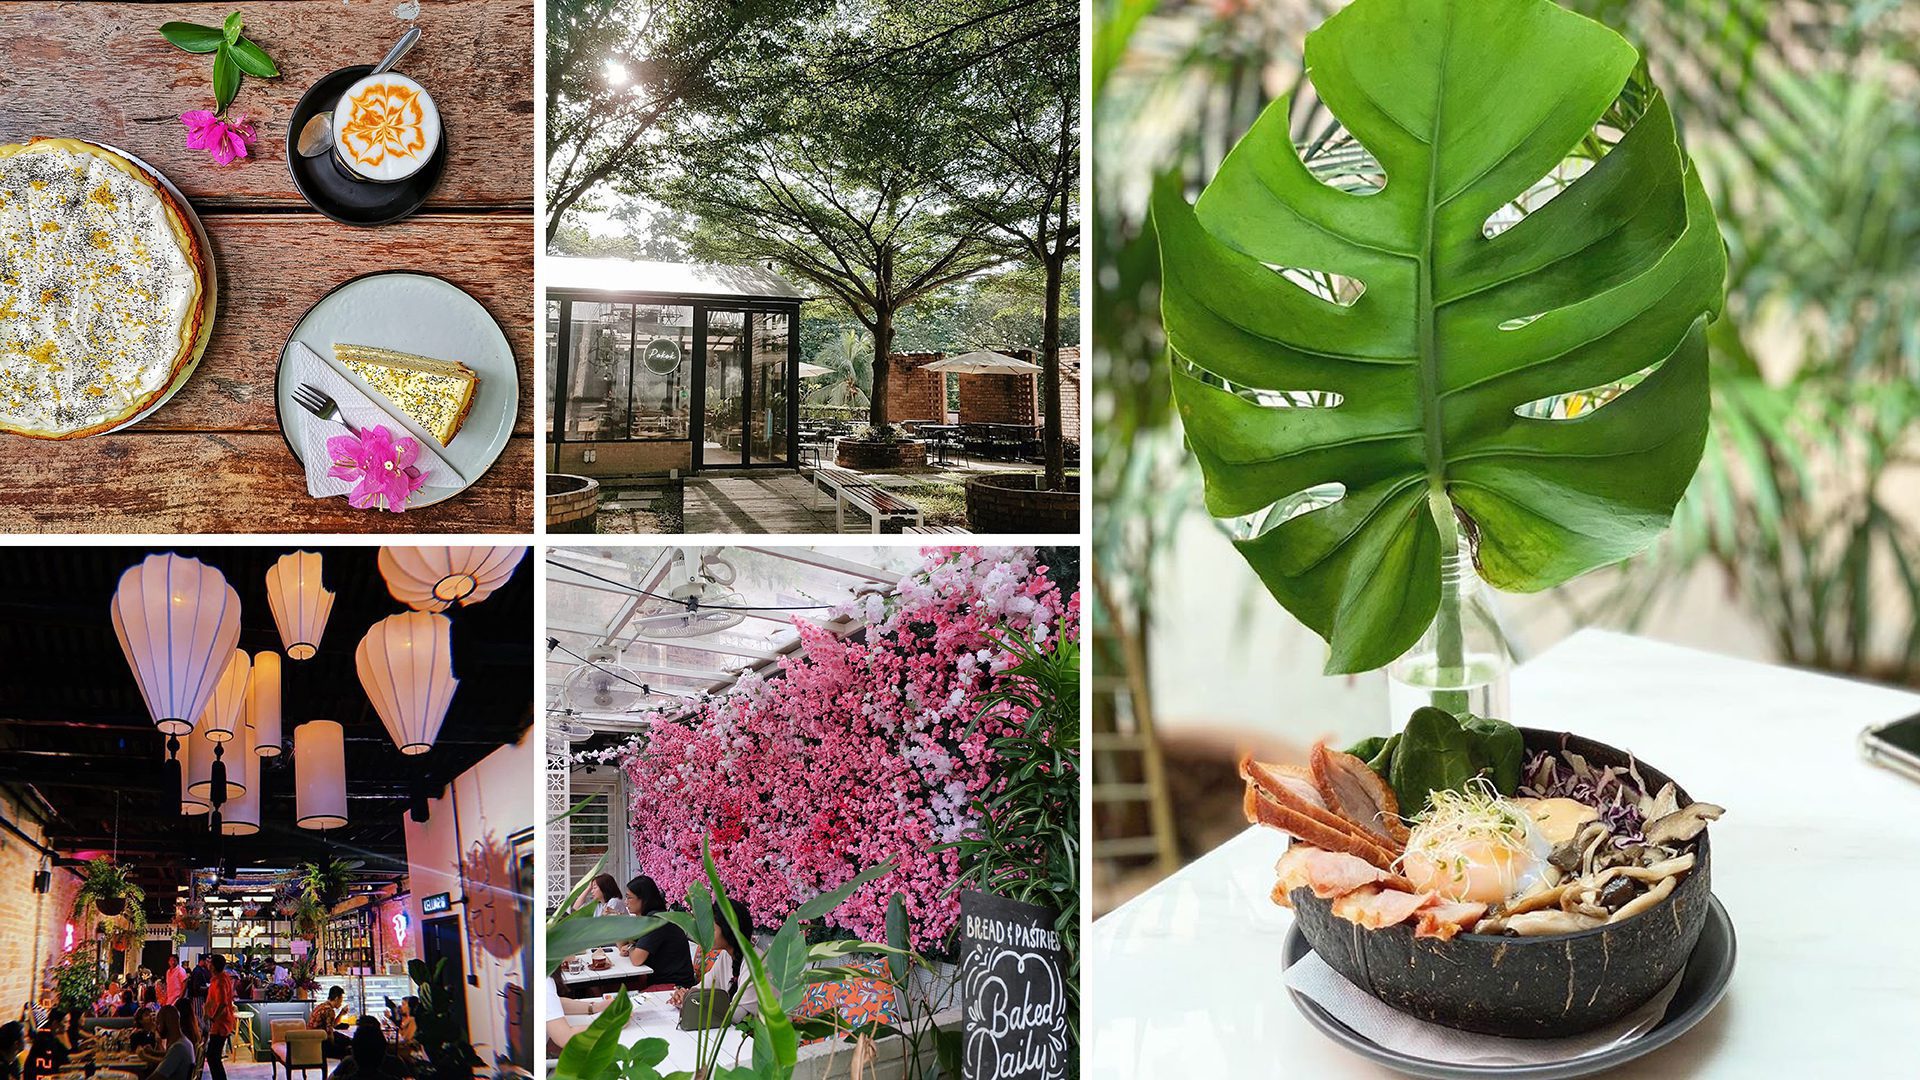 10 Picturesque Cafes & Restaurants in Kuala Lumpur